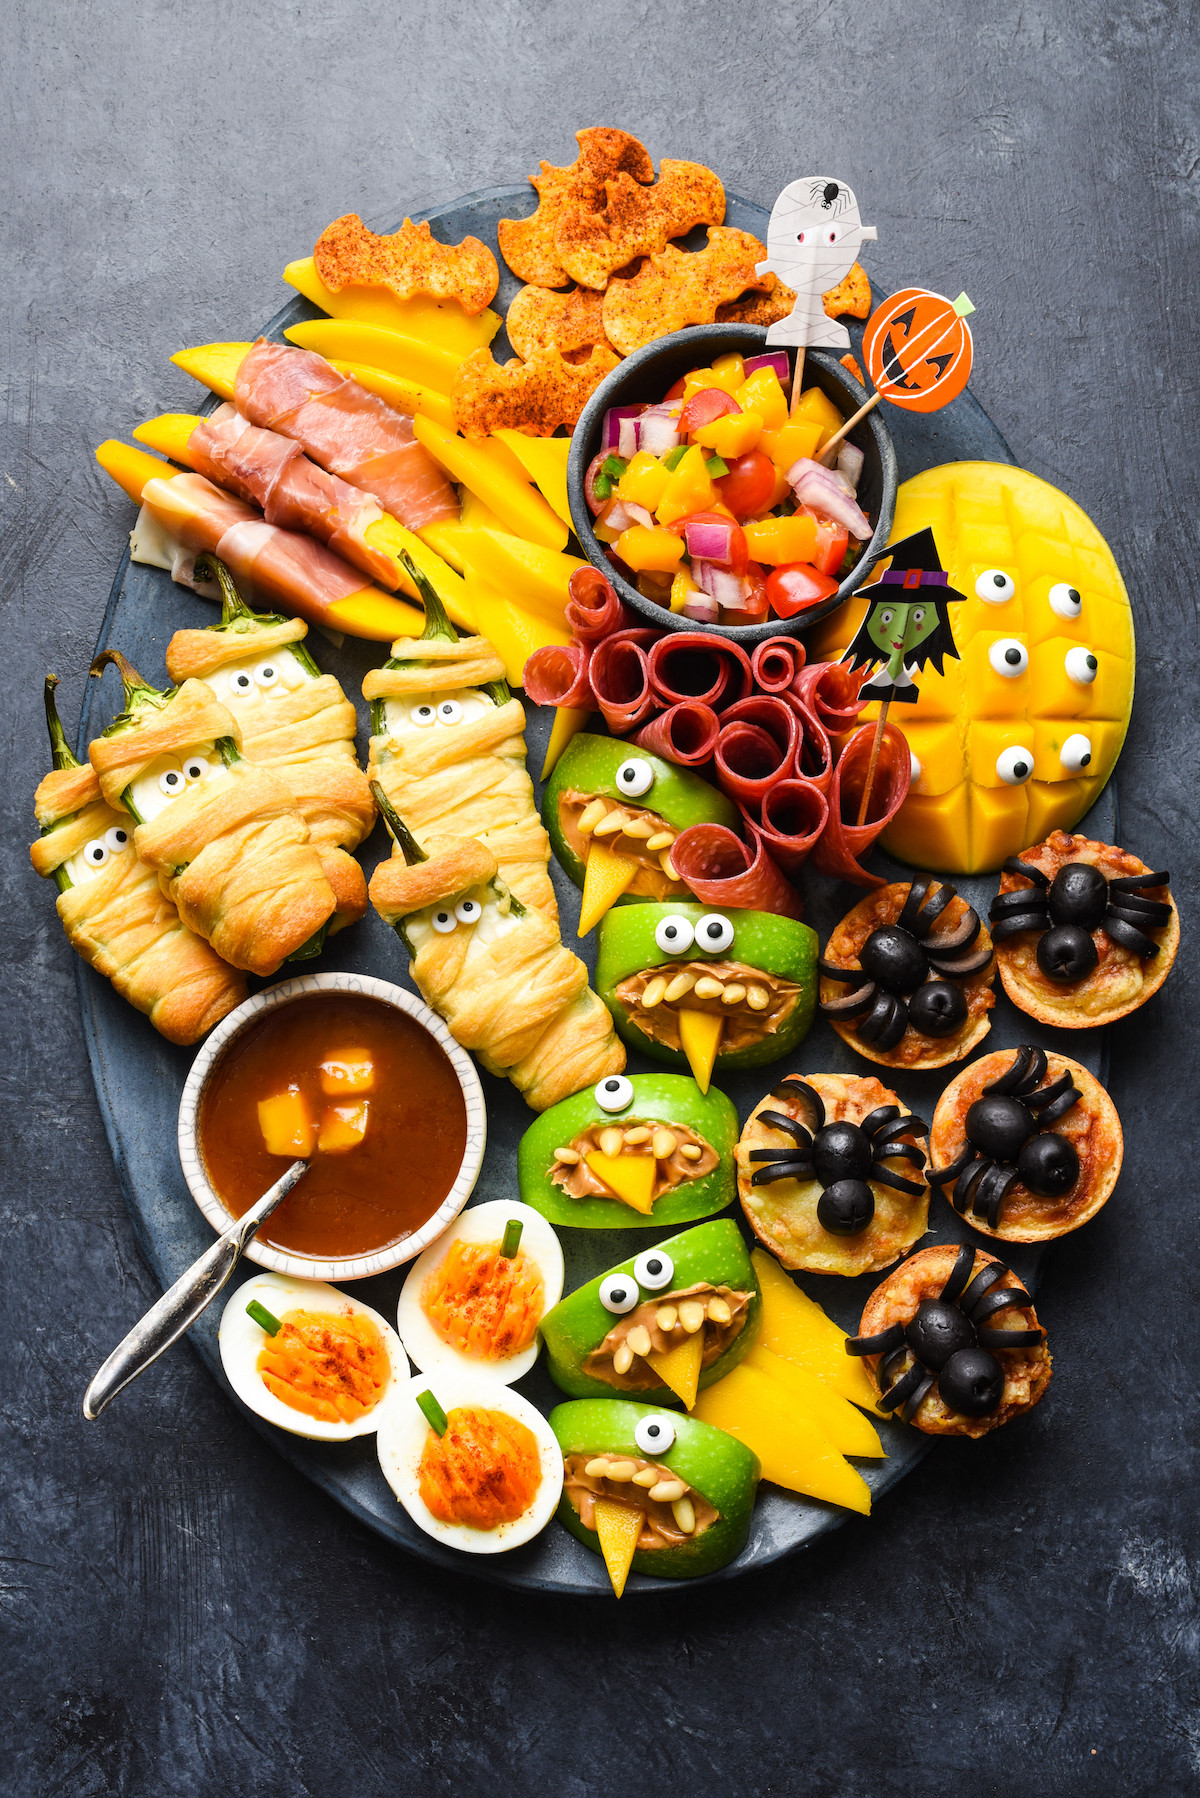 Halloween Food Ideas For A Party
 Easy Halloween Party Food